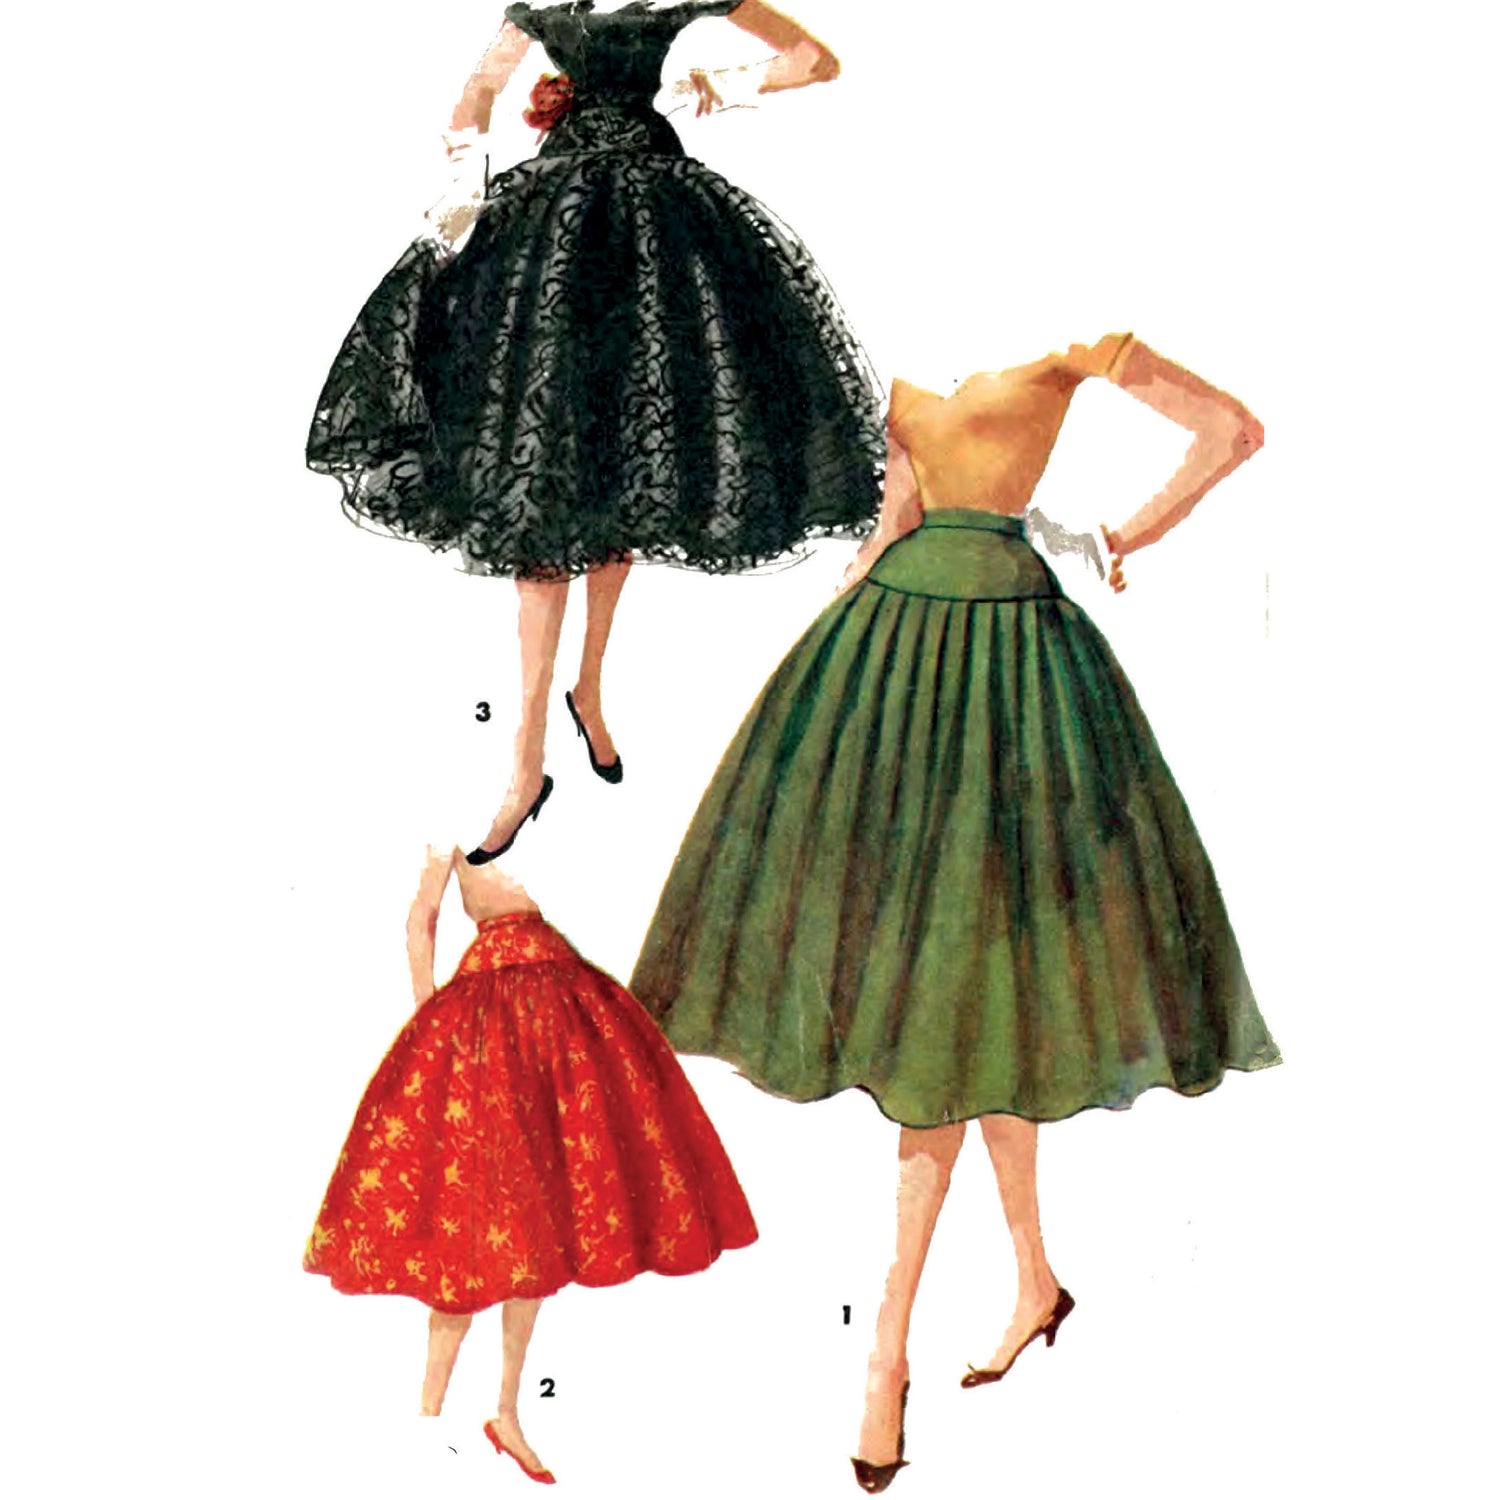 Women wearing skirts. Left top: View 3, black with new overlay. Left bottom: View 2, red. Right: View 1, green.